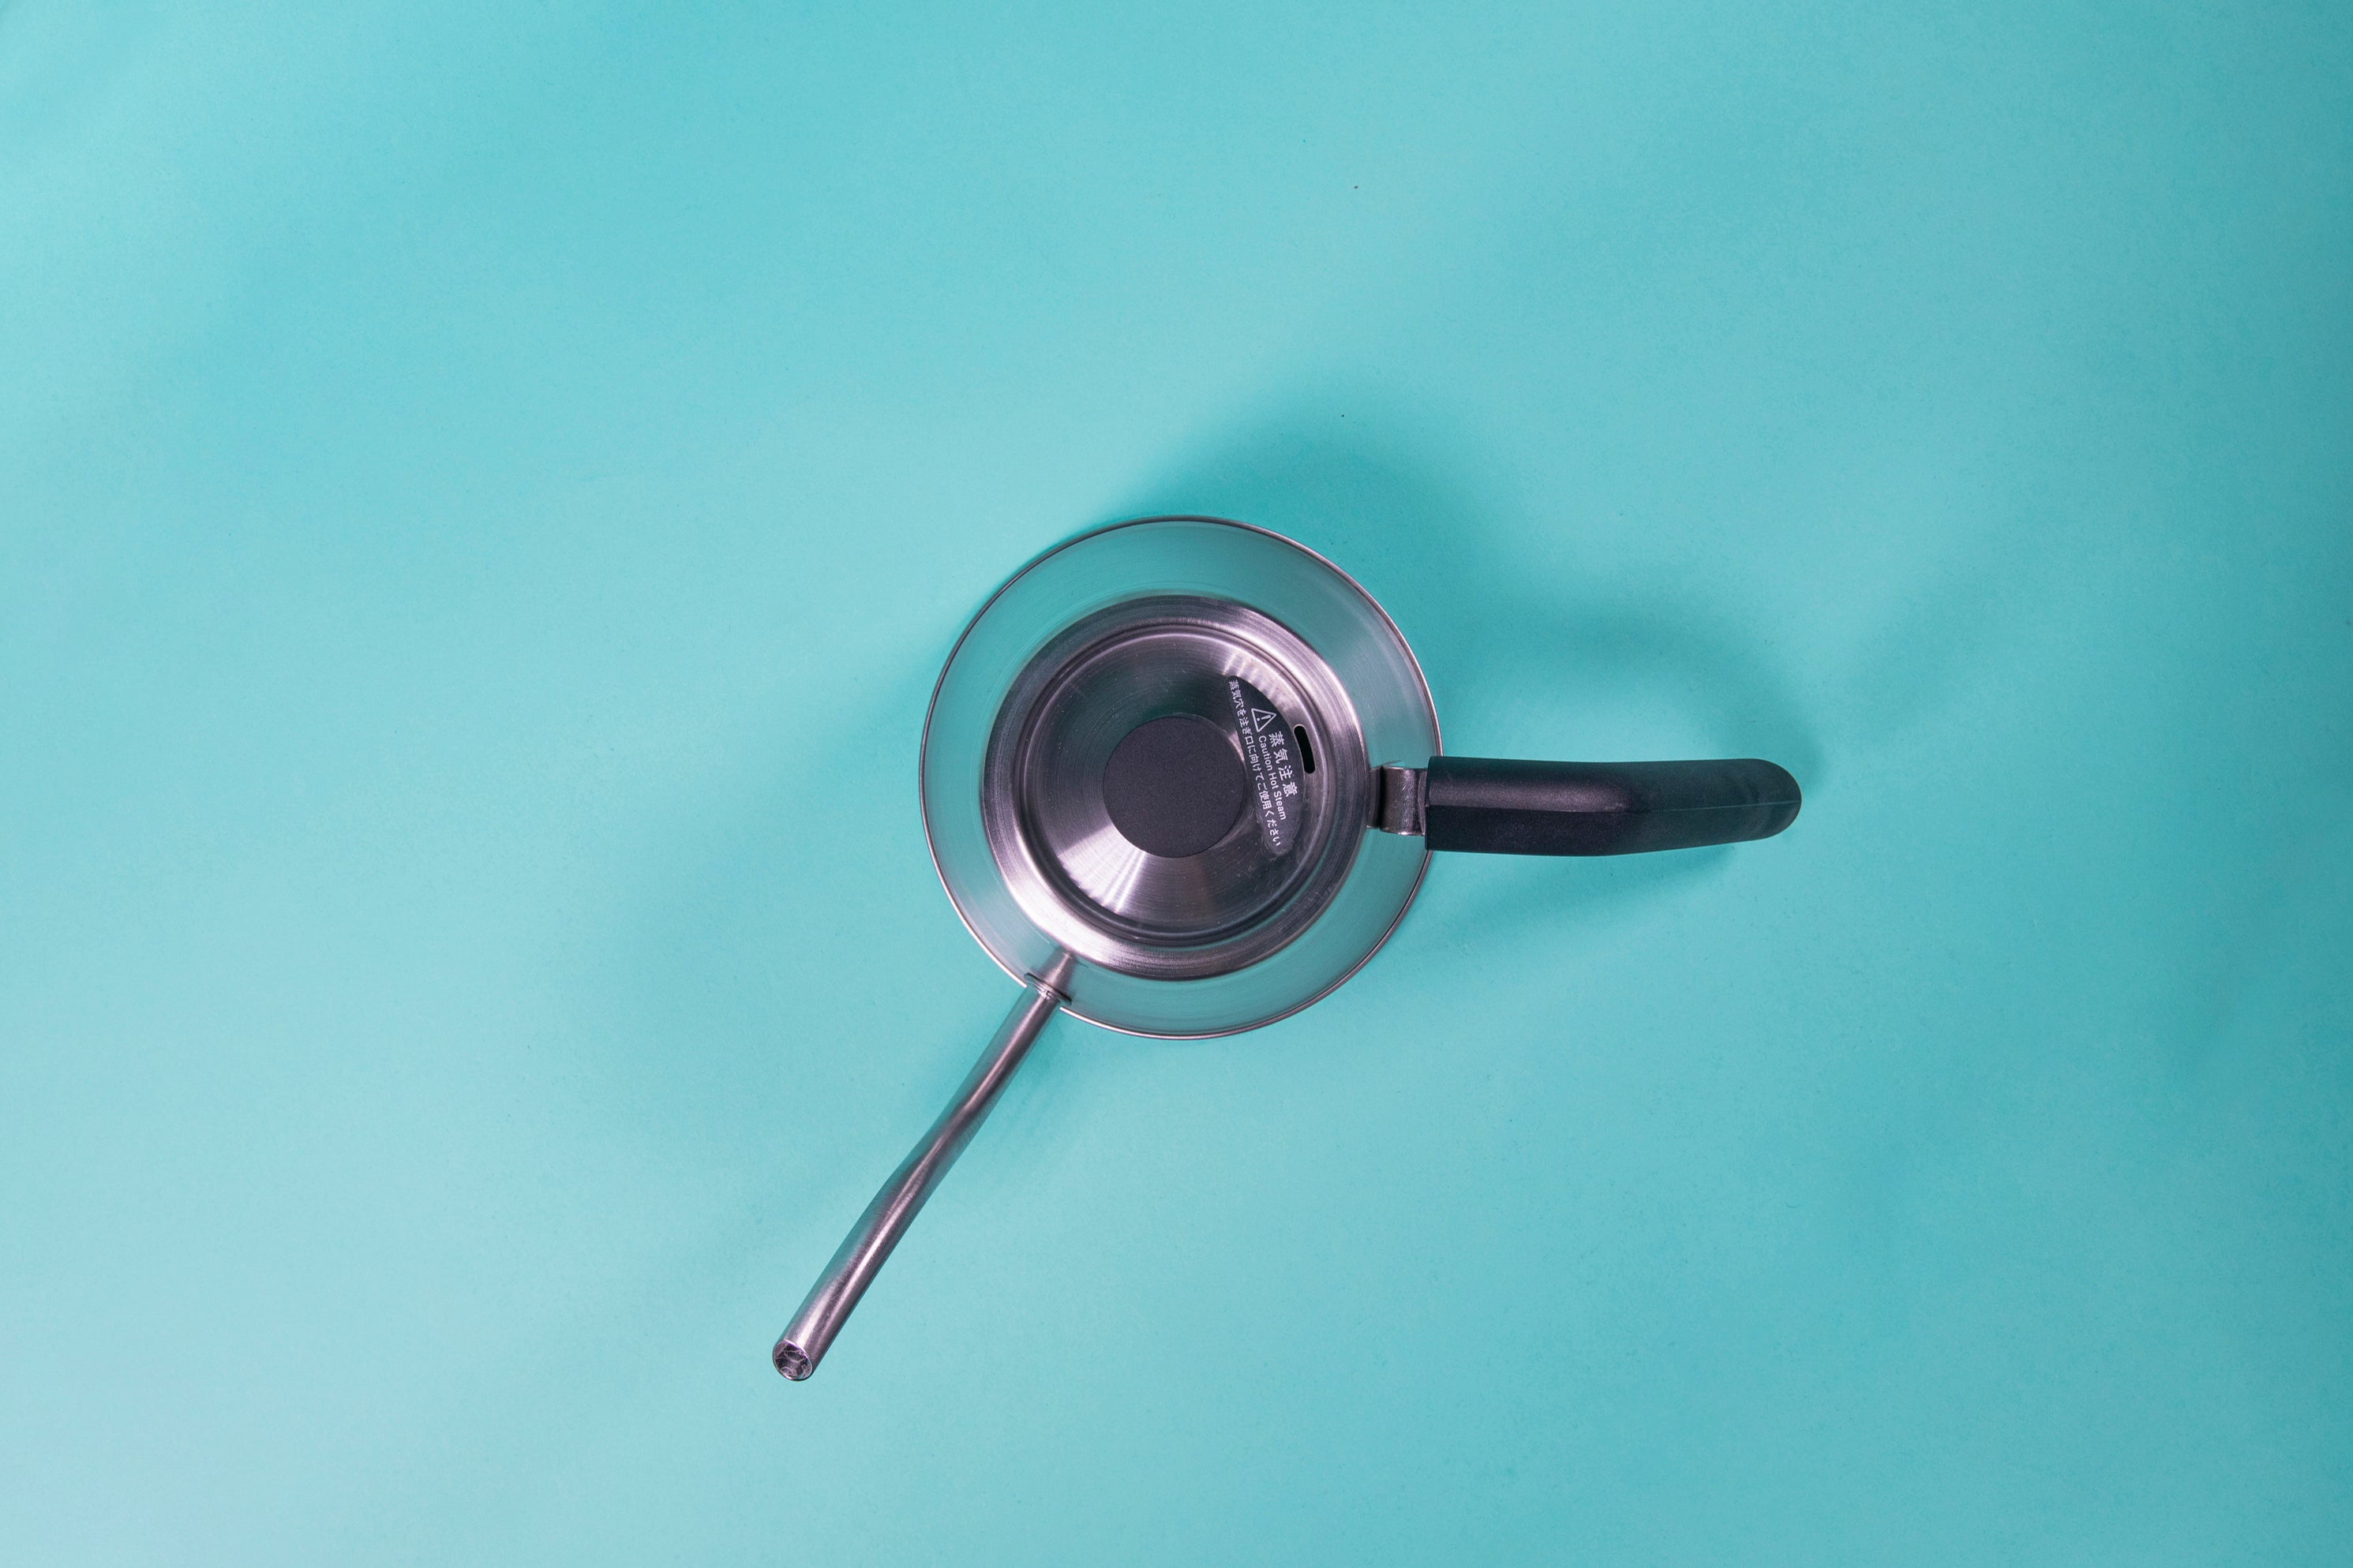 Showing the top of a silver stainless steel kettle with black plastic handle and short cylindrical black plastic lid knob set against a blue background.